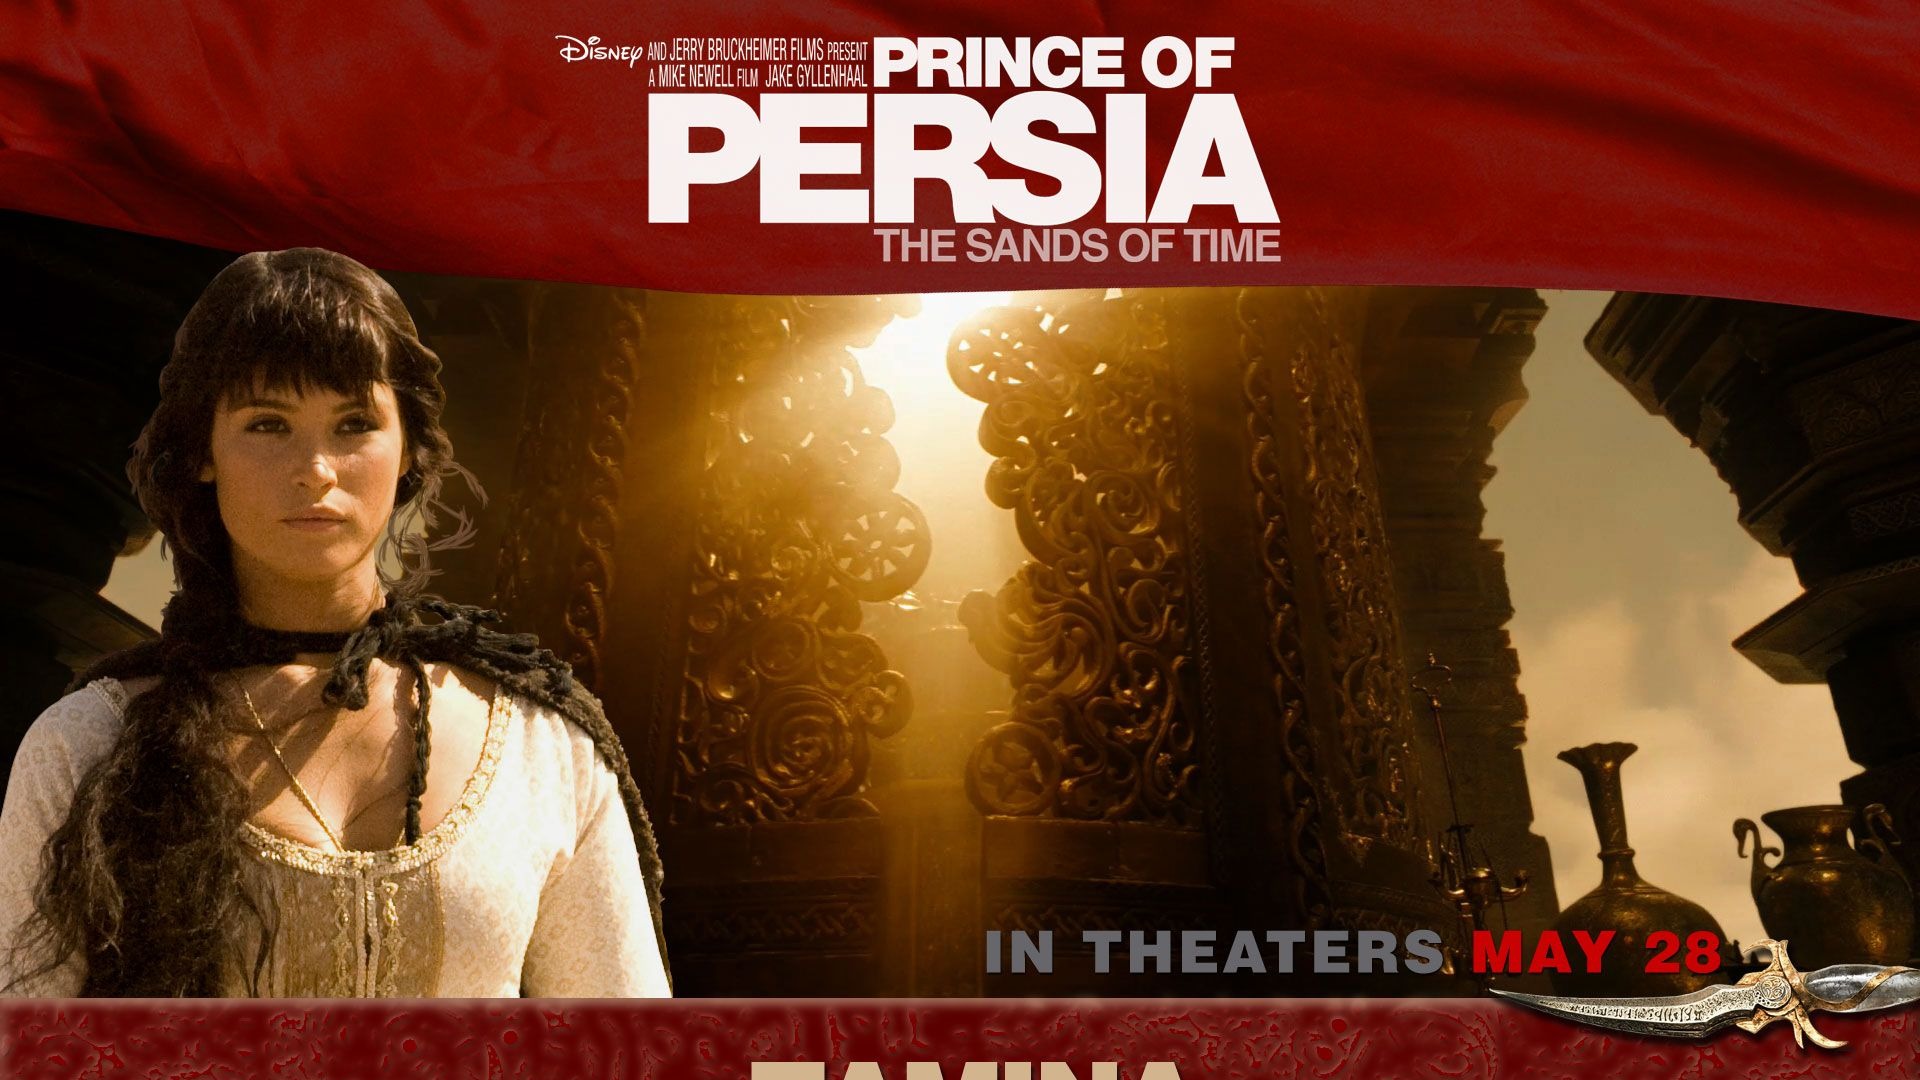 Prince of Persia The Sands of Time wallpaper #36 - 1920x1080